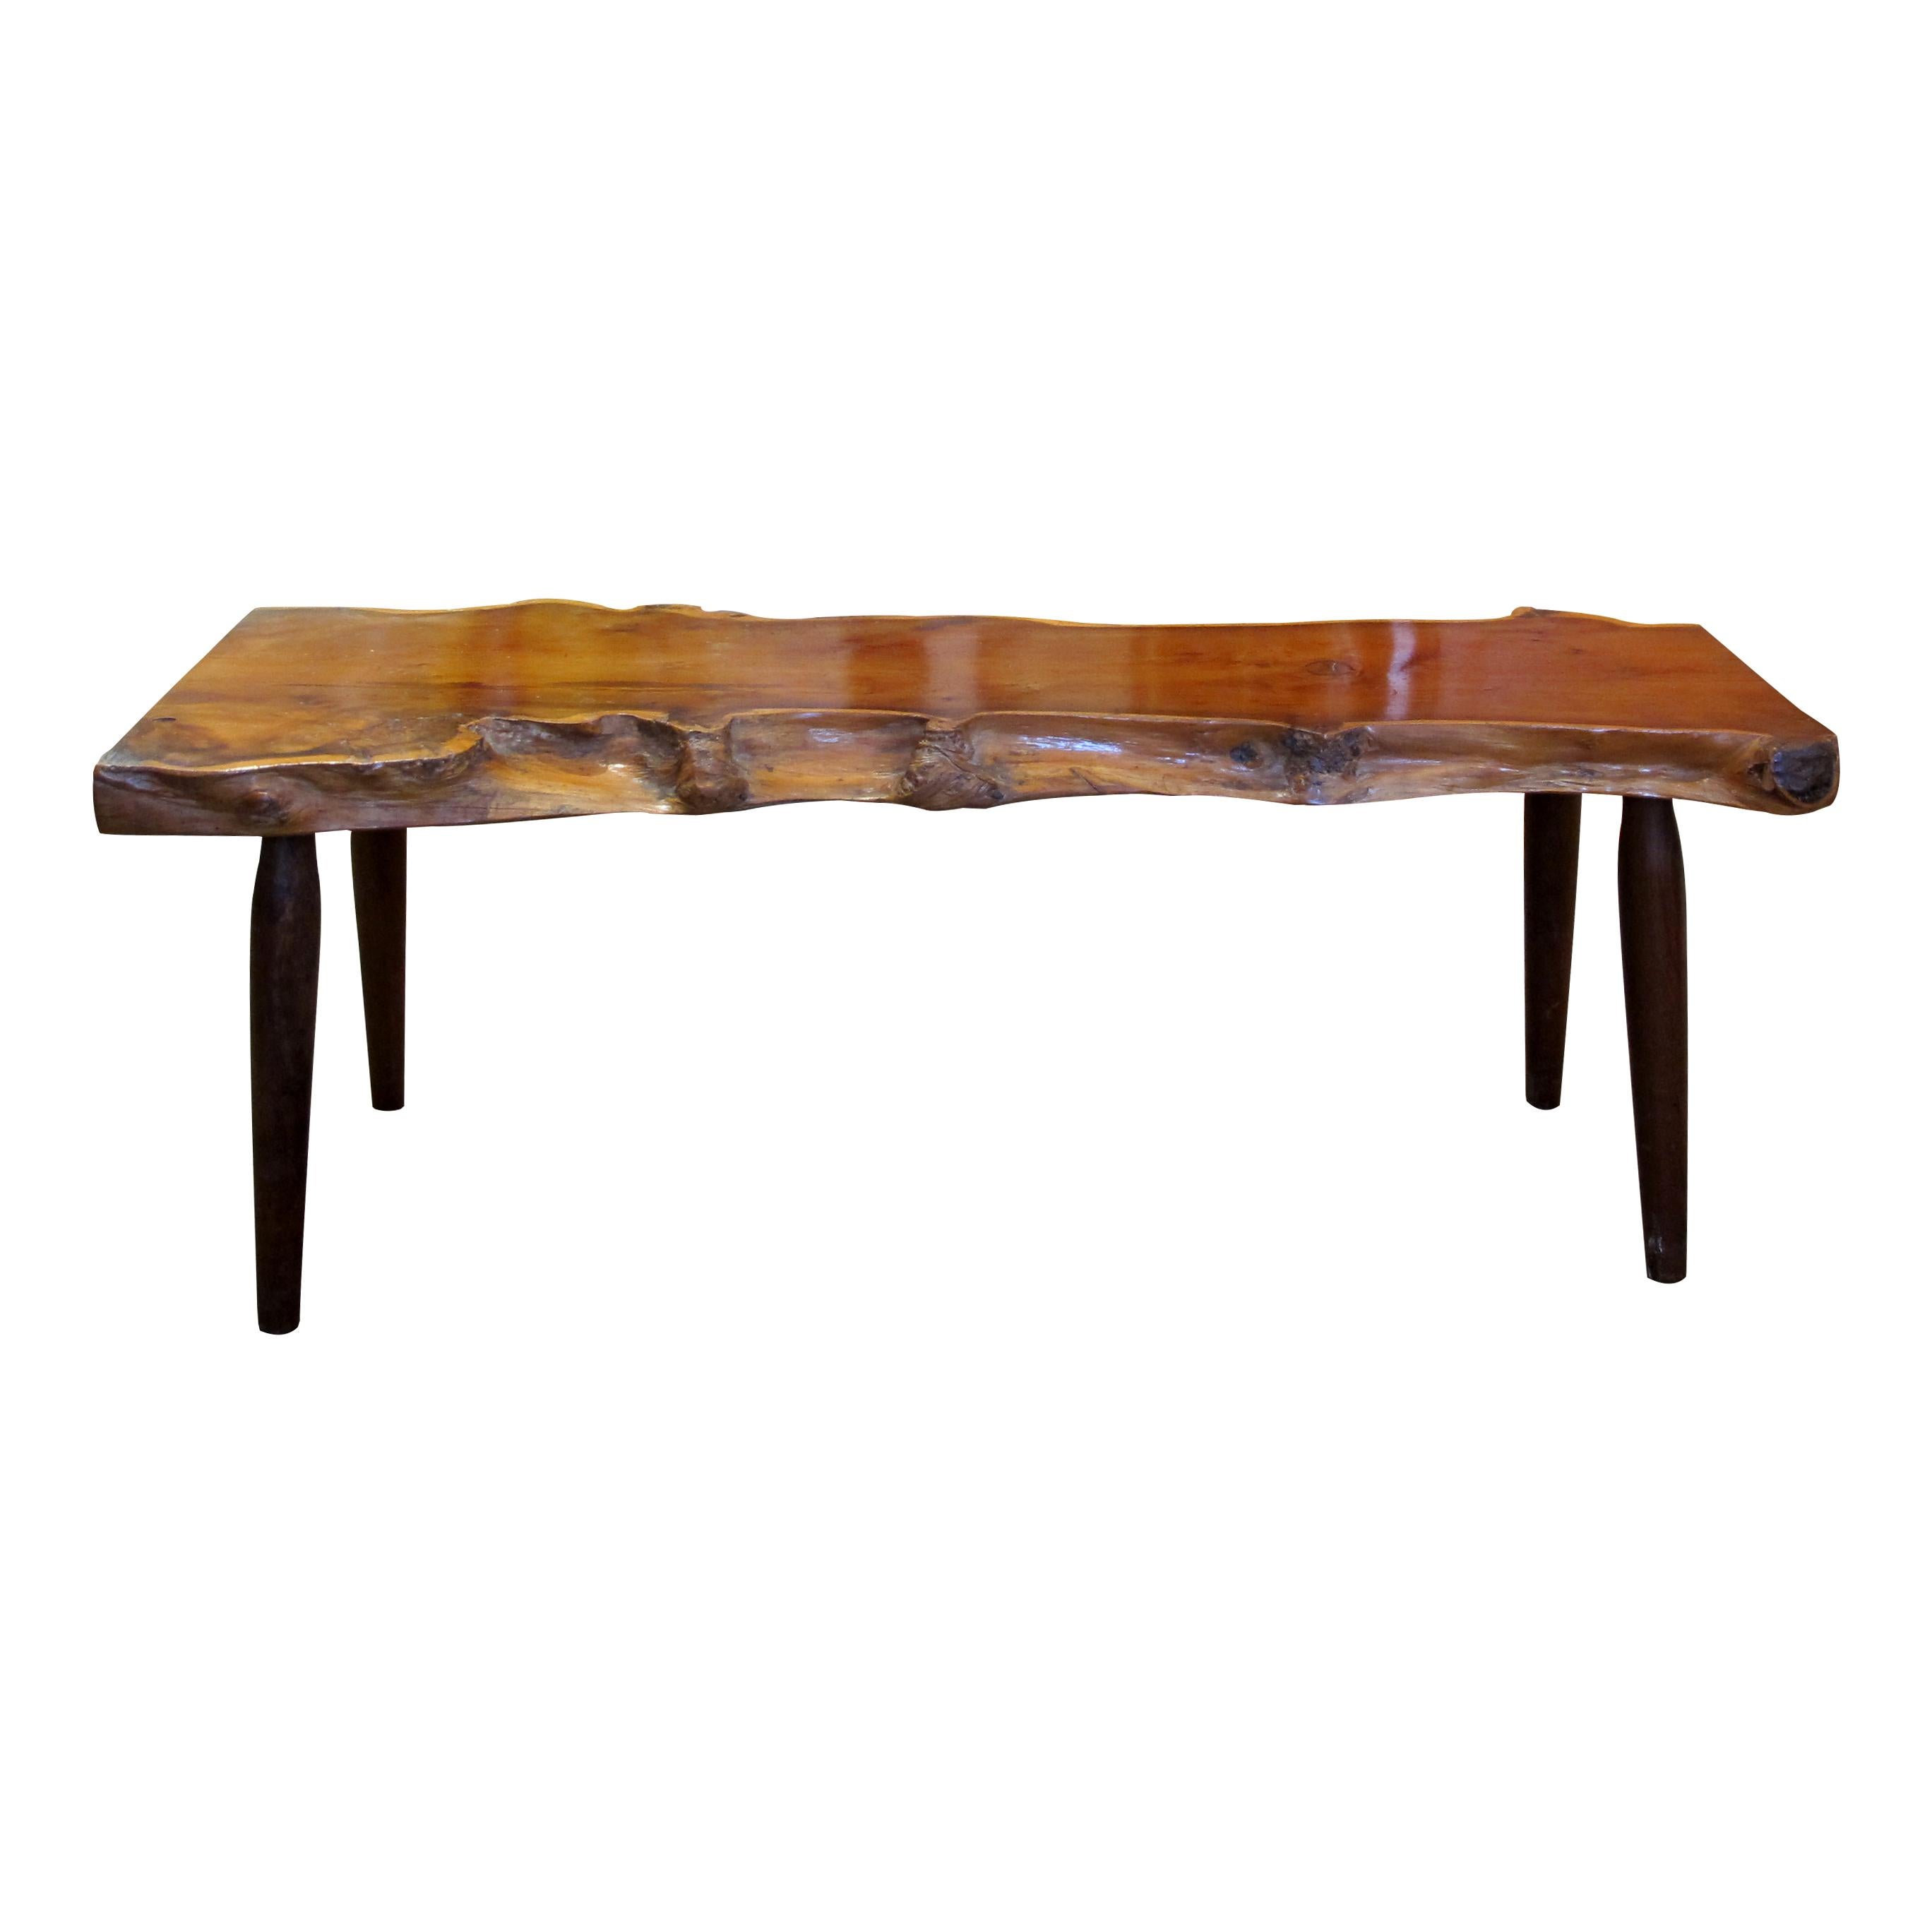 Reminiscent of some of George Nakashima's work this bench is attributed to Reynolds of Ludlow. Crafted with precision and care, the bench boasts a beautiful live edge design, showcasing the natural contours and imperfections and rich hues of the yew